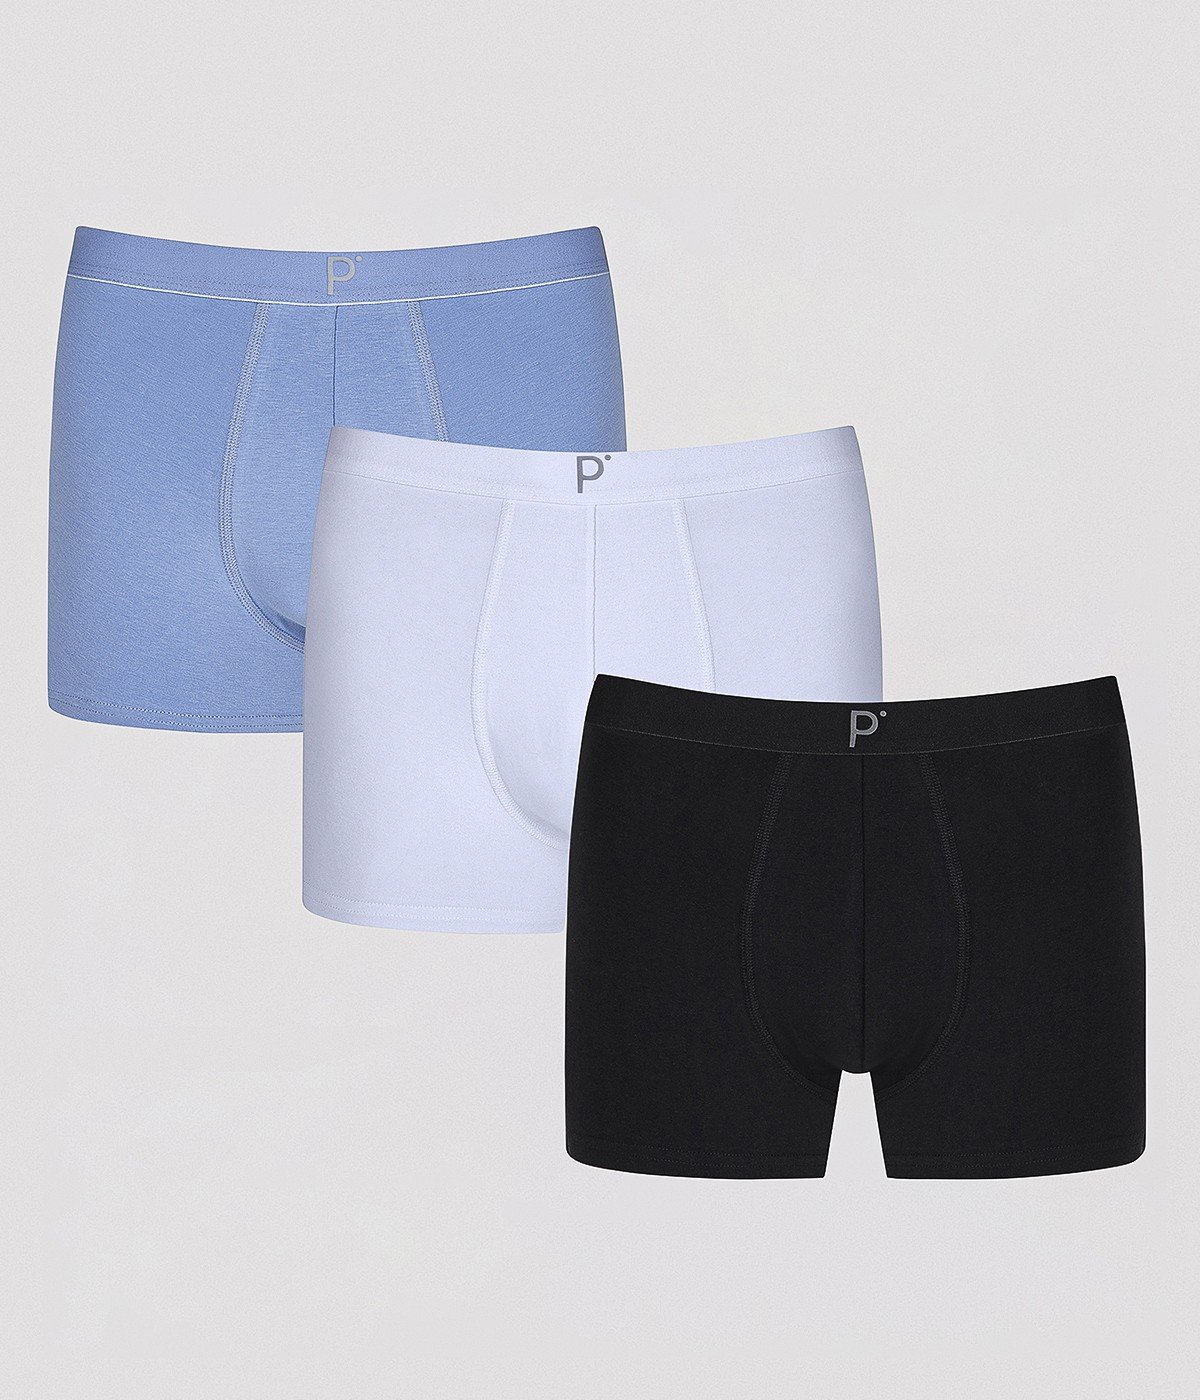 Blueish 3in1 Boxer